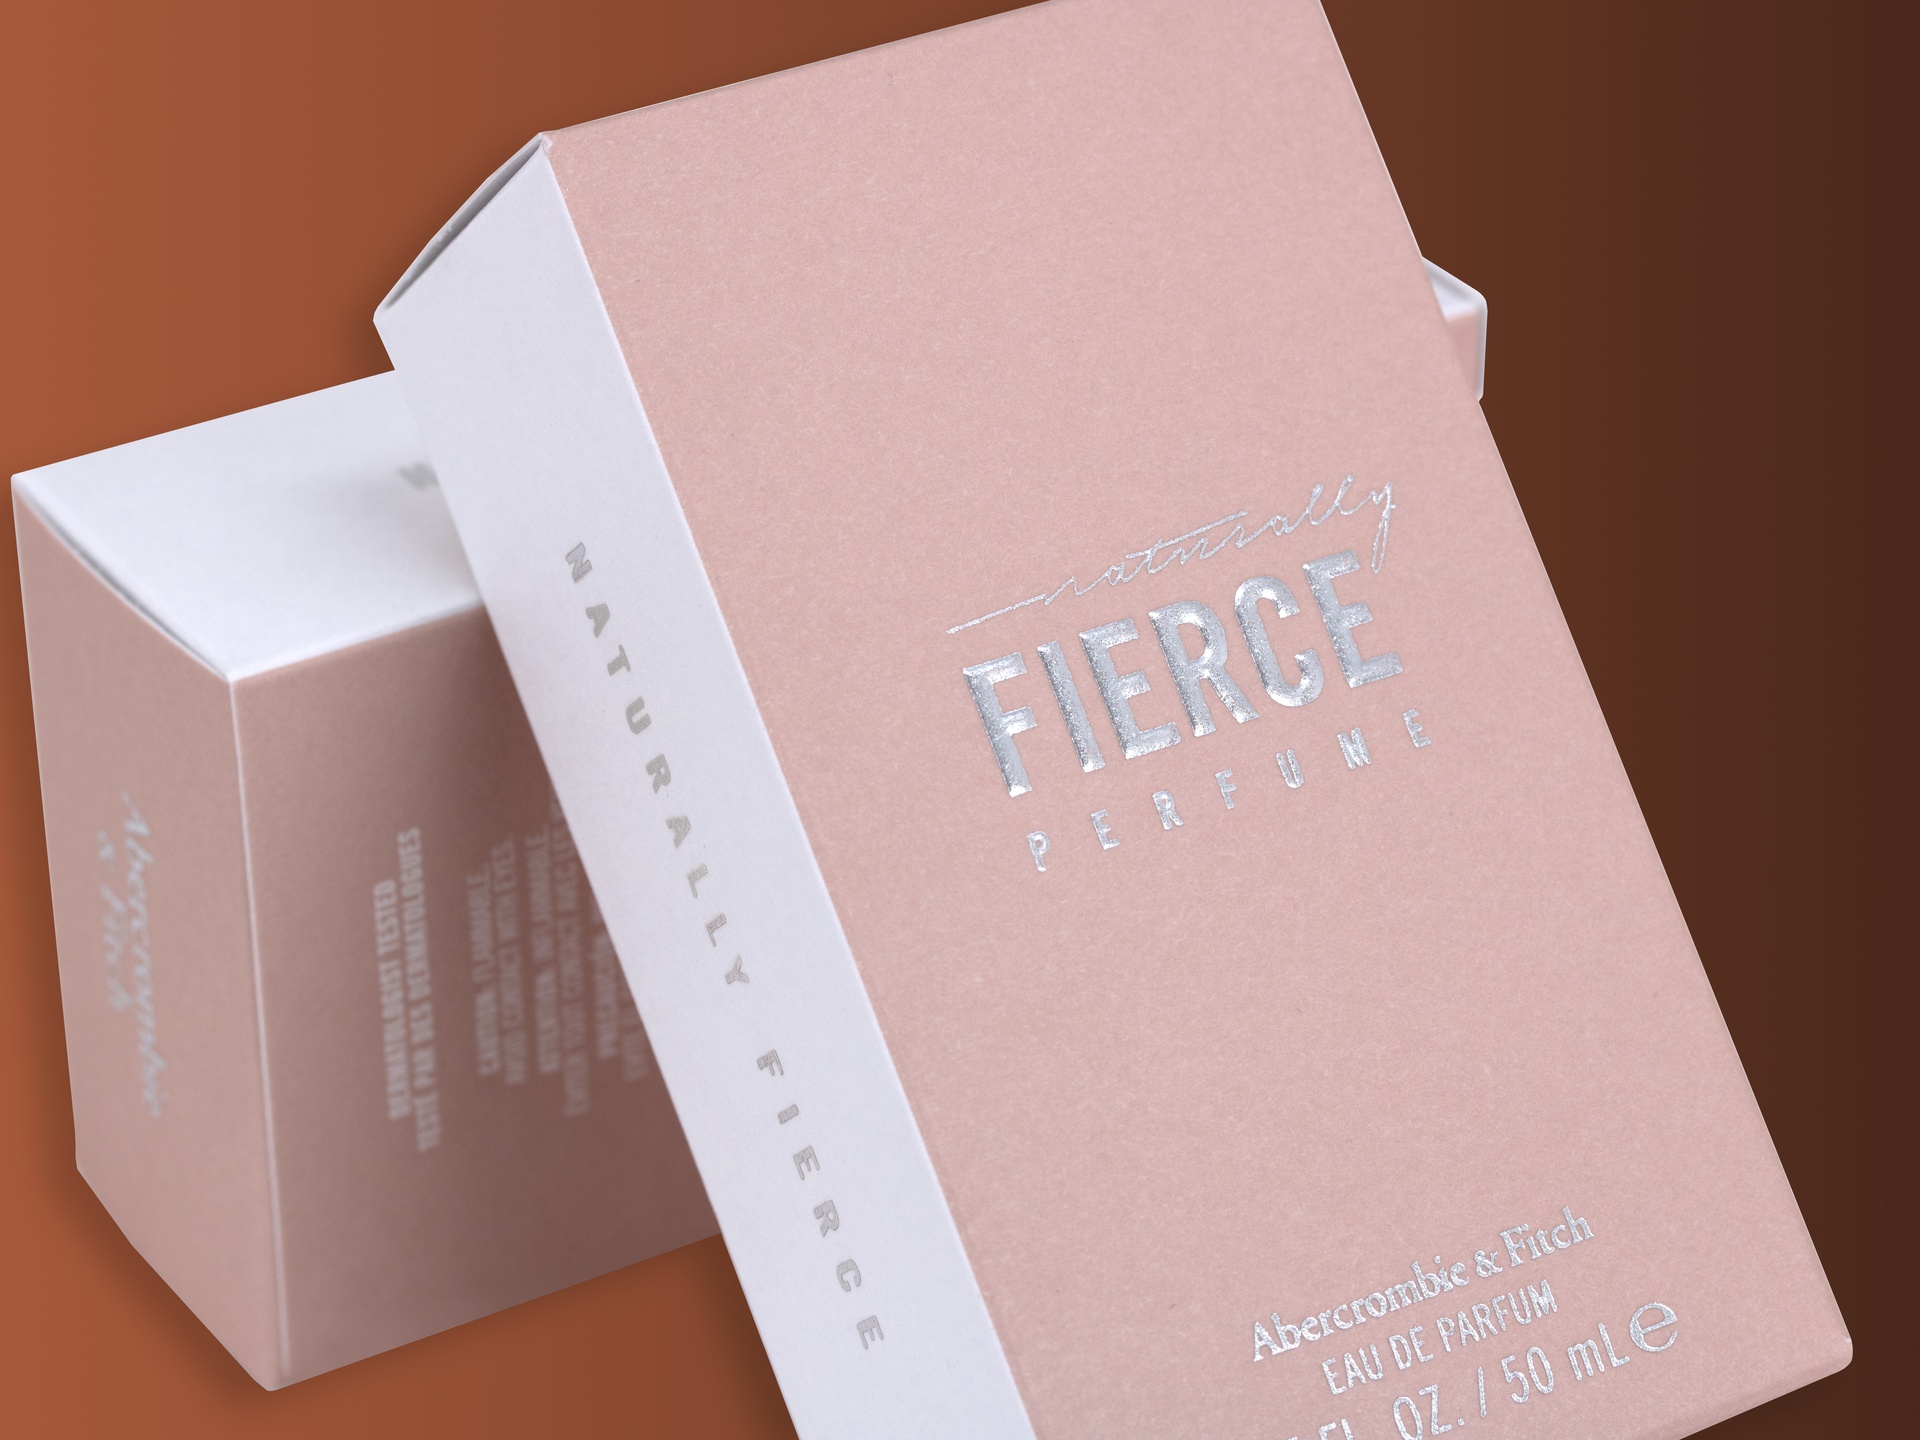 Naturally Fierce folding cartons feature recyclable paperboard and embossing.